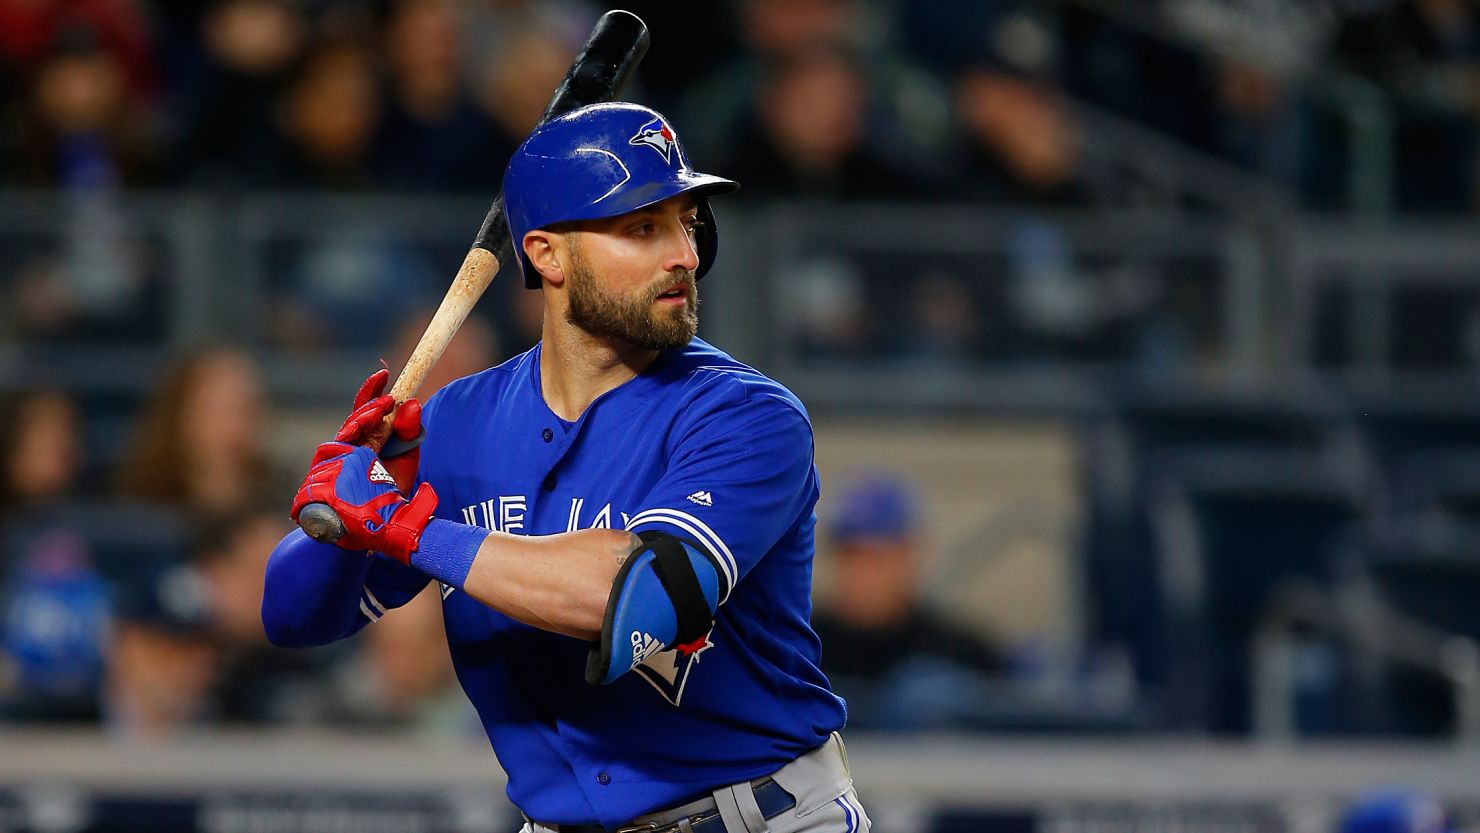 Toronto Blue Jays center fielder Kevin Pillar, shown earlier this month, called his actions "immature."